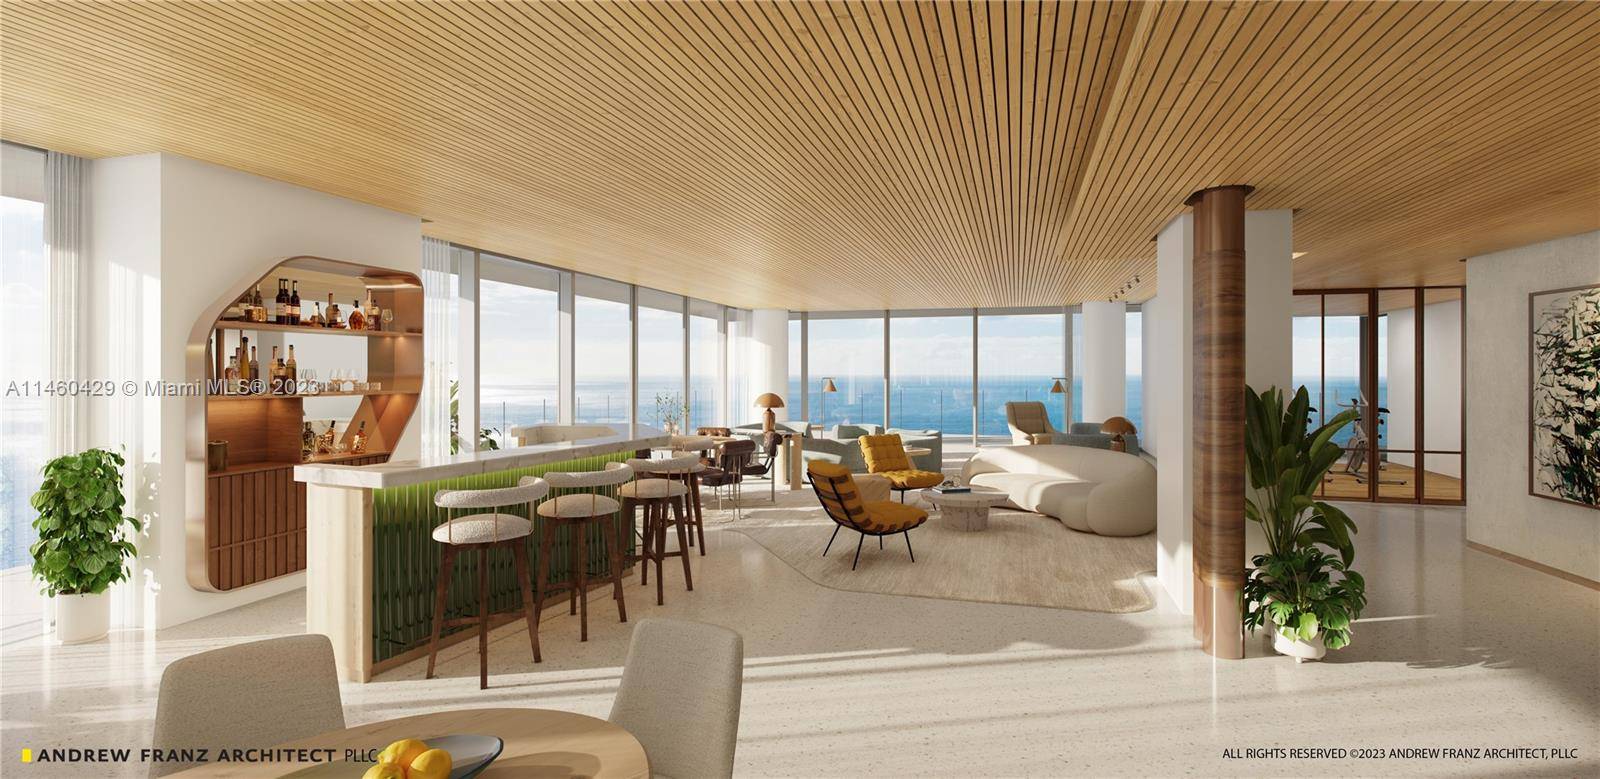 Rare opportunity in Bal Harbour s most coveted building to customize a one of a kind direct oceanfront residence in the sky.